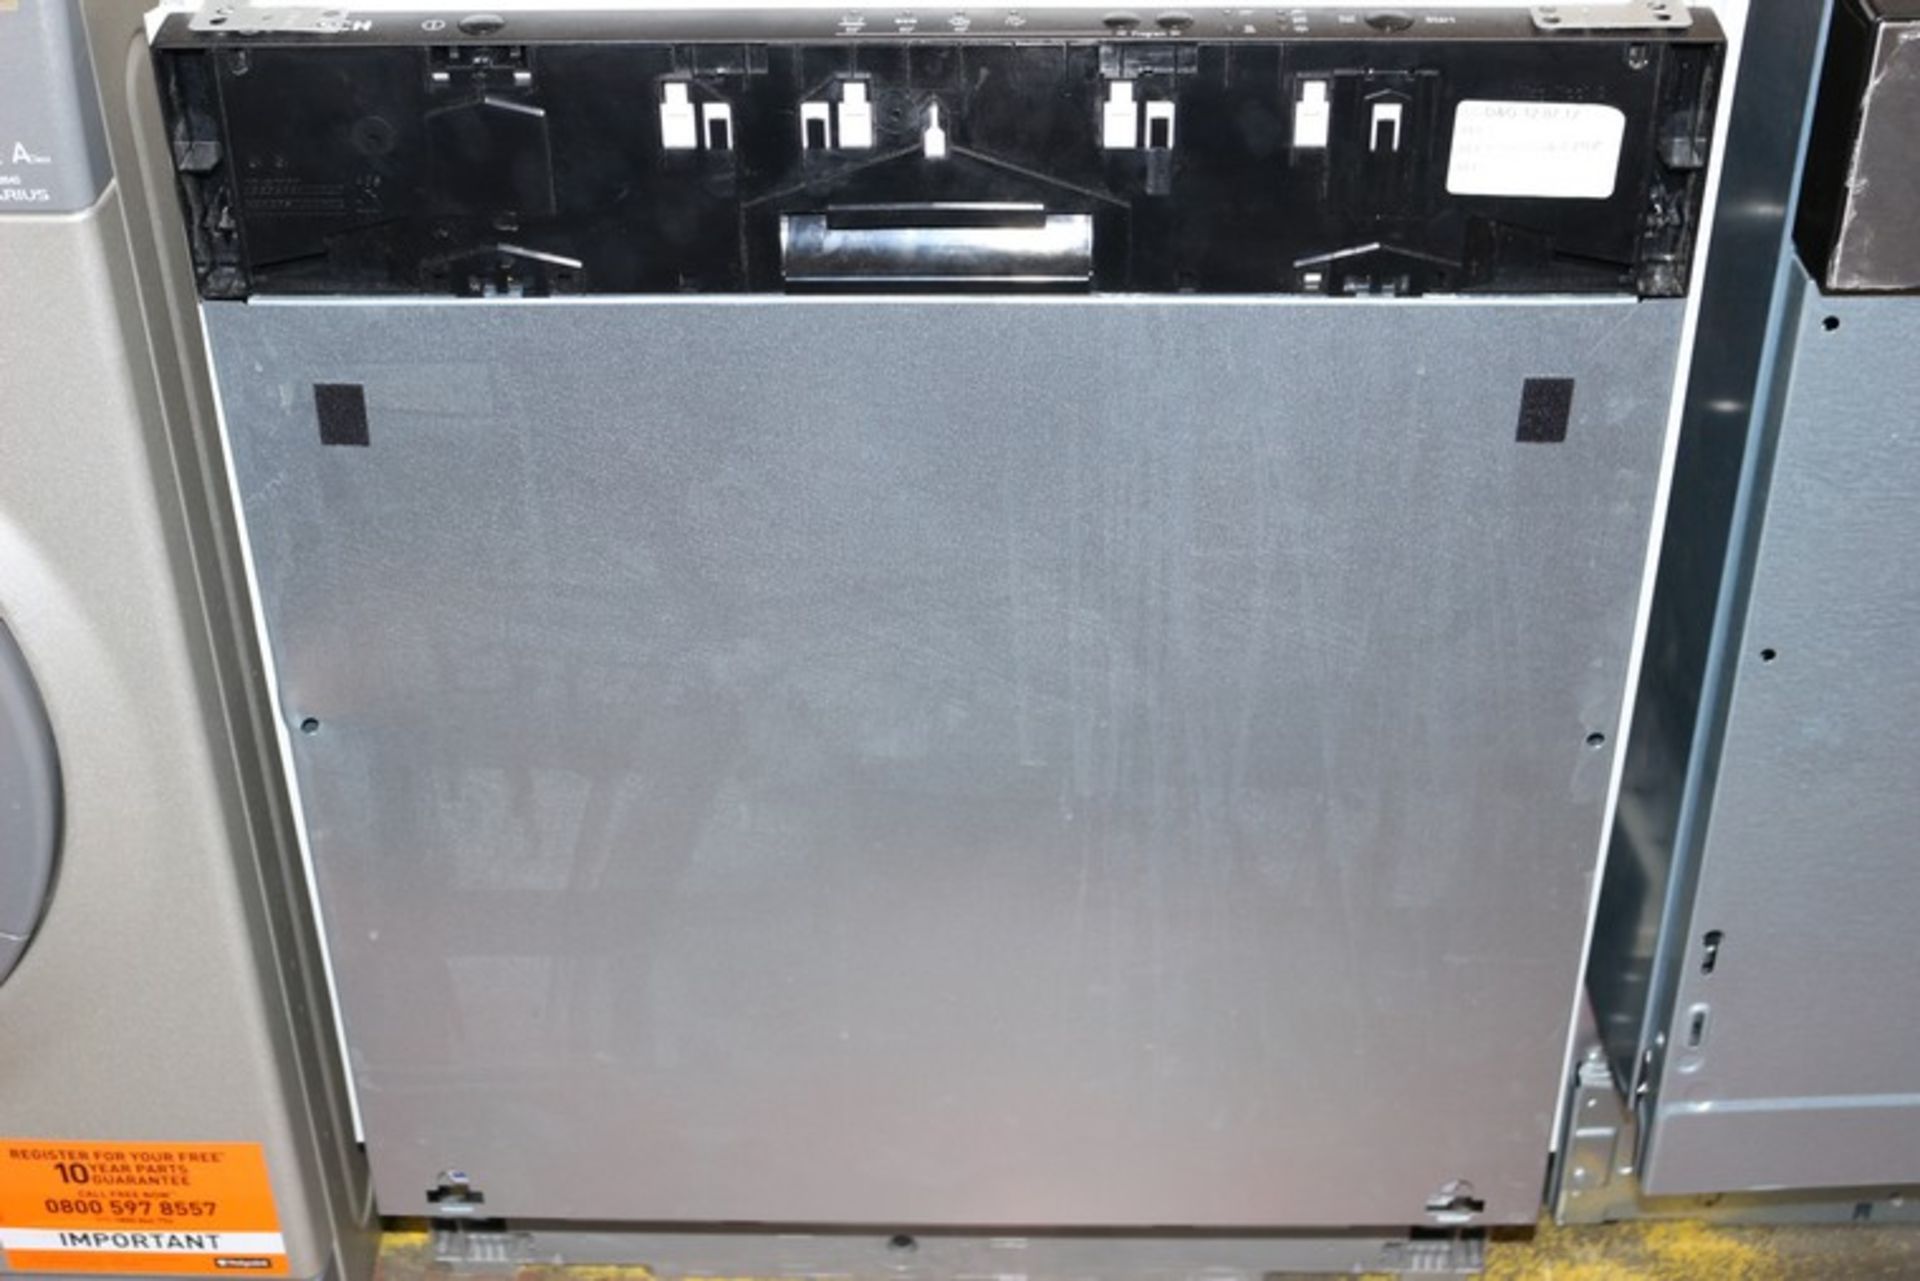 1 x BOSCH CSN00S2398 DISHWASHER (12.7.17) *PLEASE NOTE THAT THE BID PRICE IS MULTIPLIED BY THE